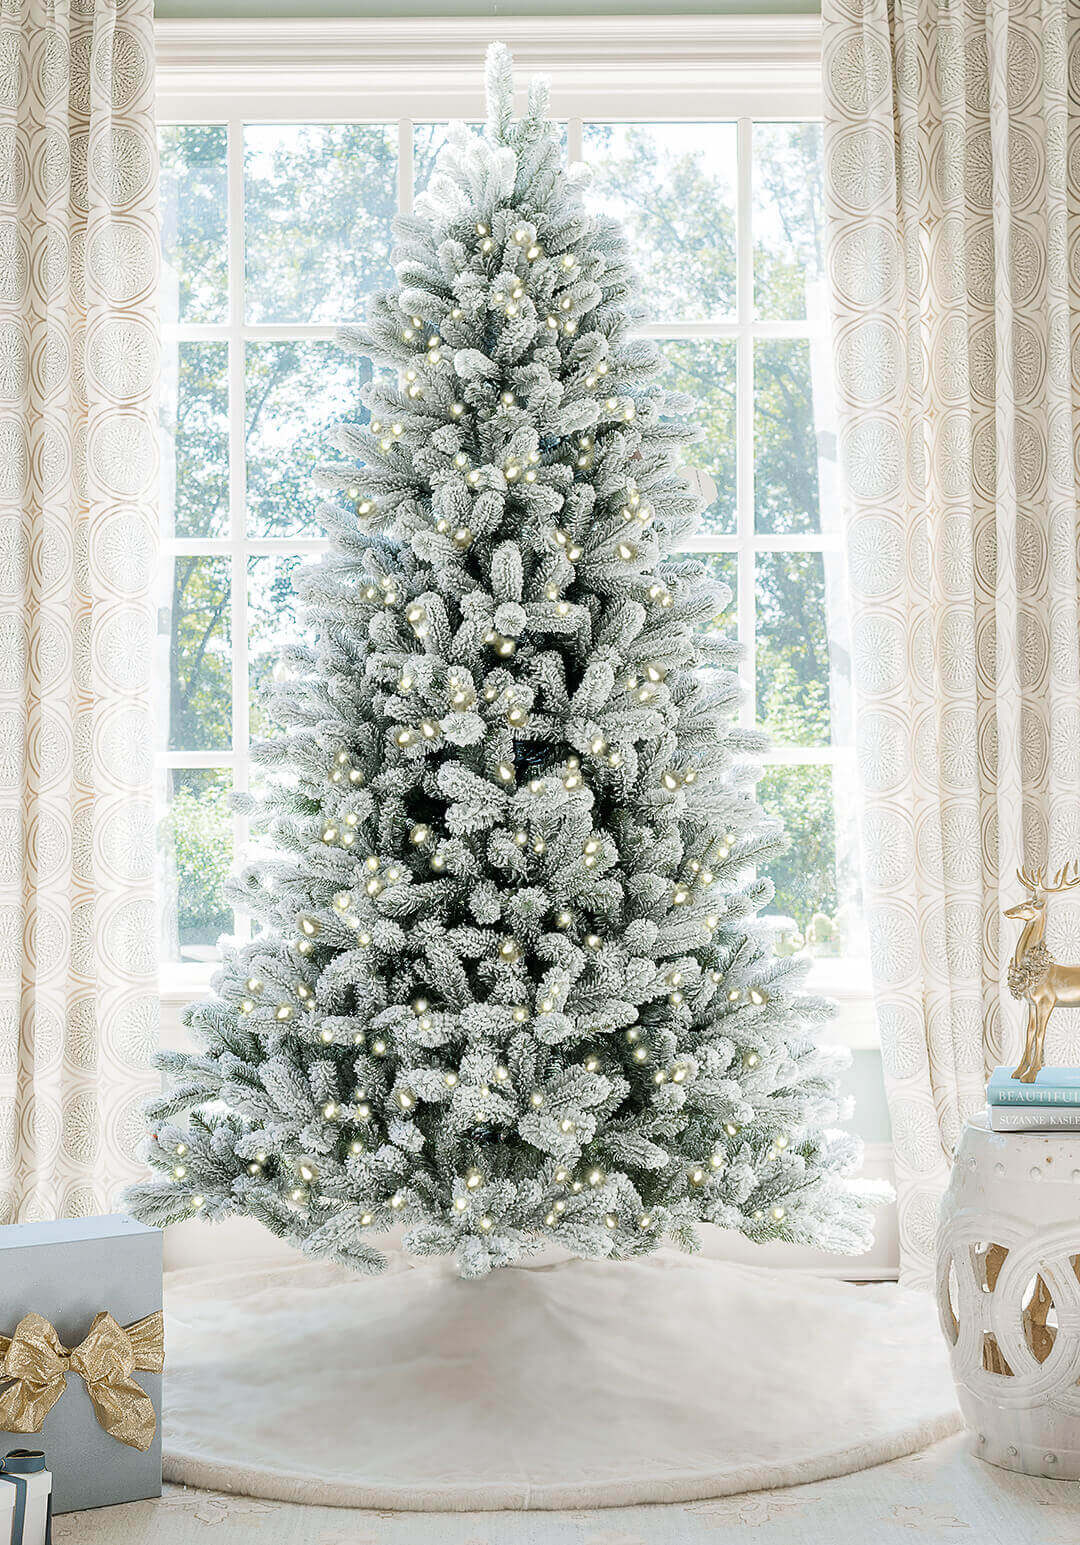 King of Christmas 7.5' King Flock® Artificial Christmas Tree with 800 Warm White LED Lights